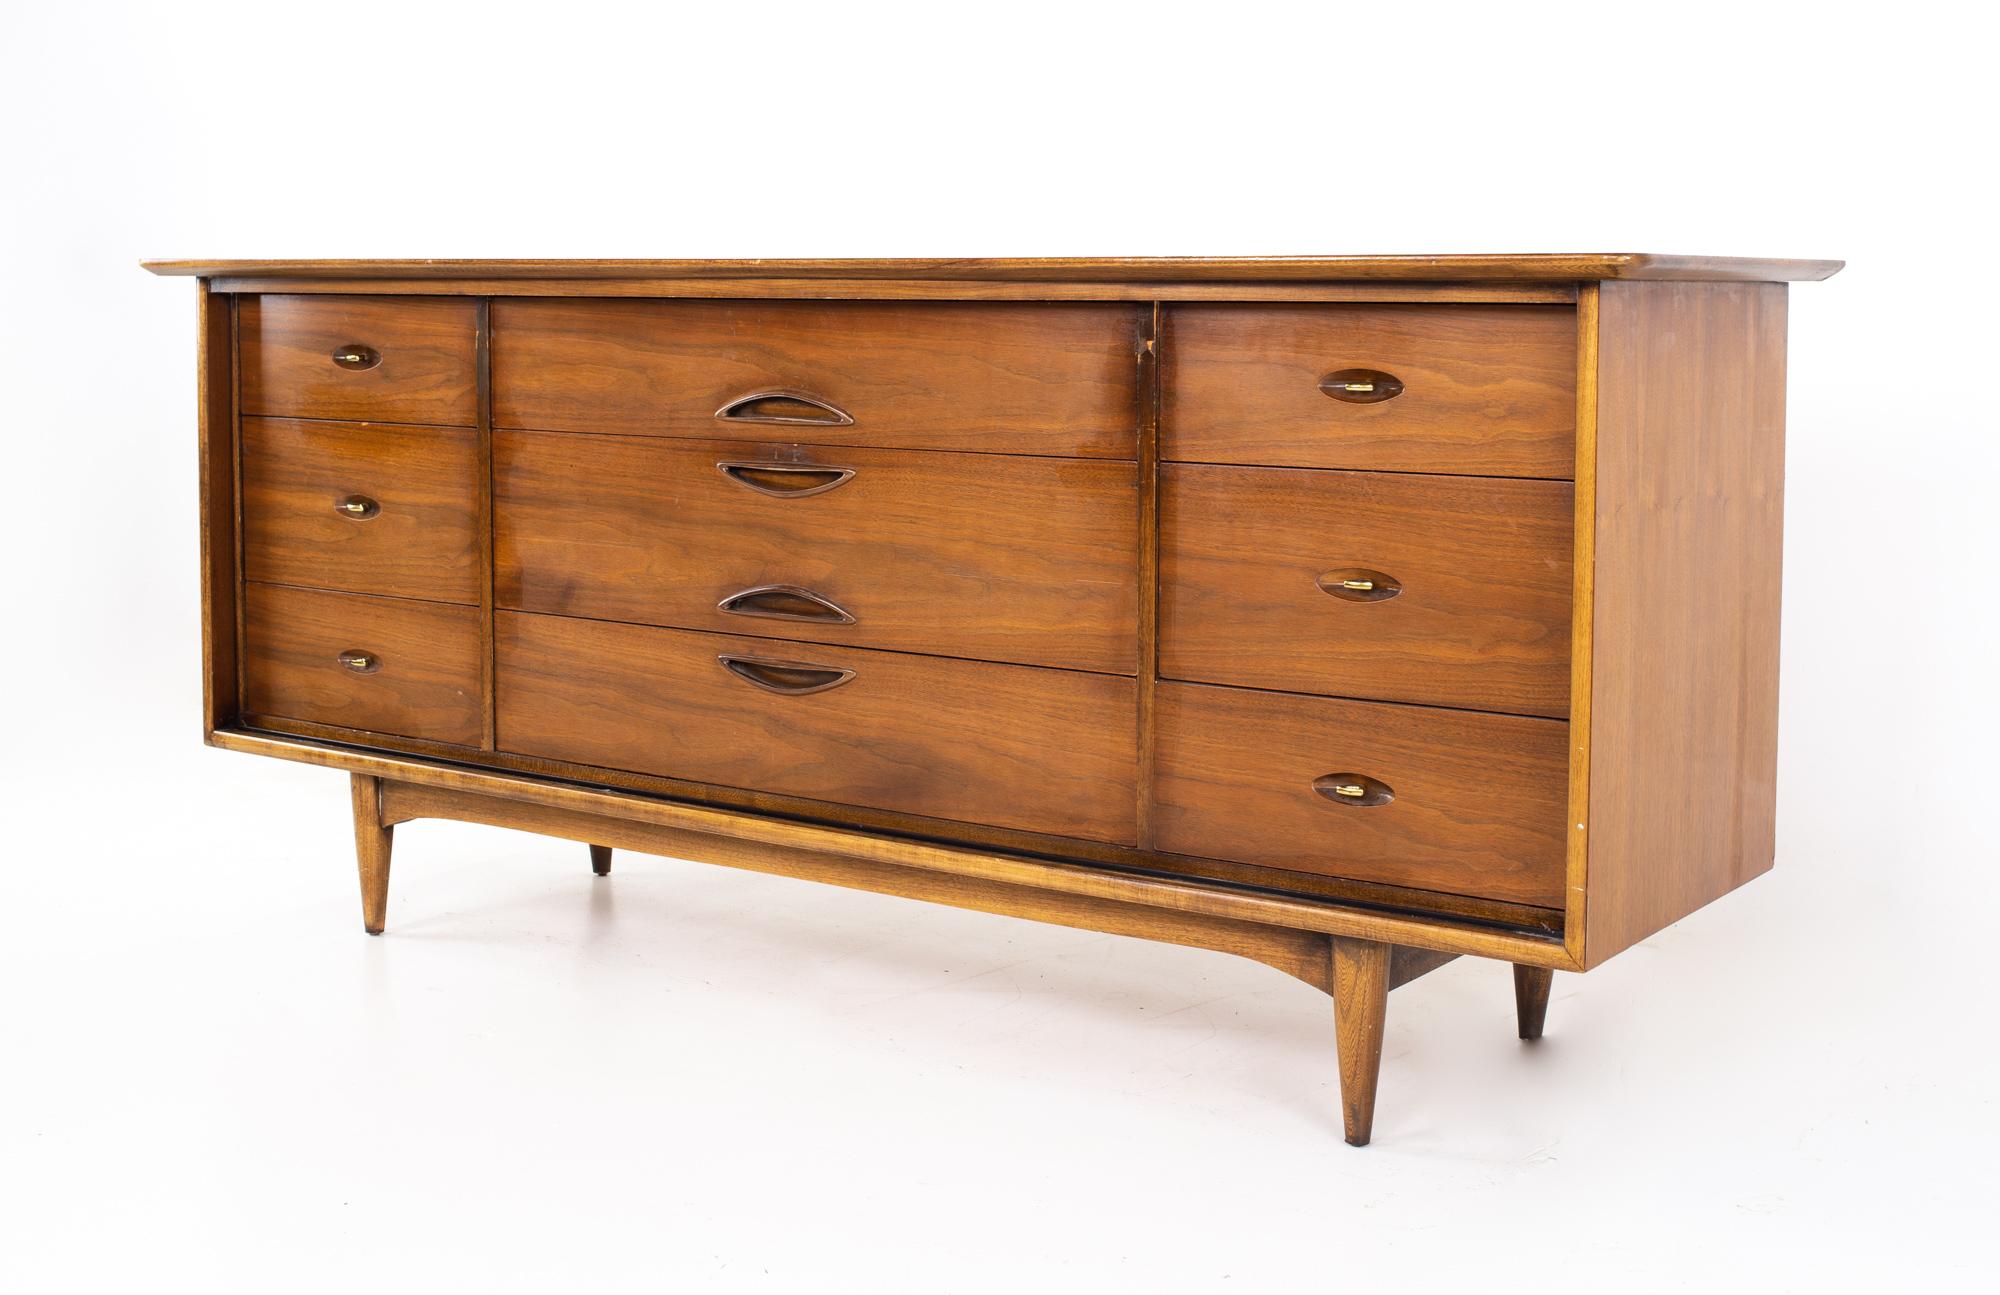 Kent Coffey Greenbrier midcentury walnut 9-drawer lowboy dresser.
Dresser measures: 76 wide x 21.25 deep x 32.5 inches high

All pieces of furniture can be had in what we call restored vintage condition. That means the piece is restored upon